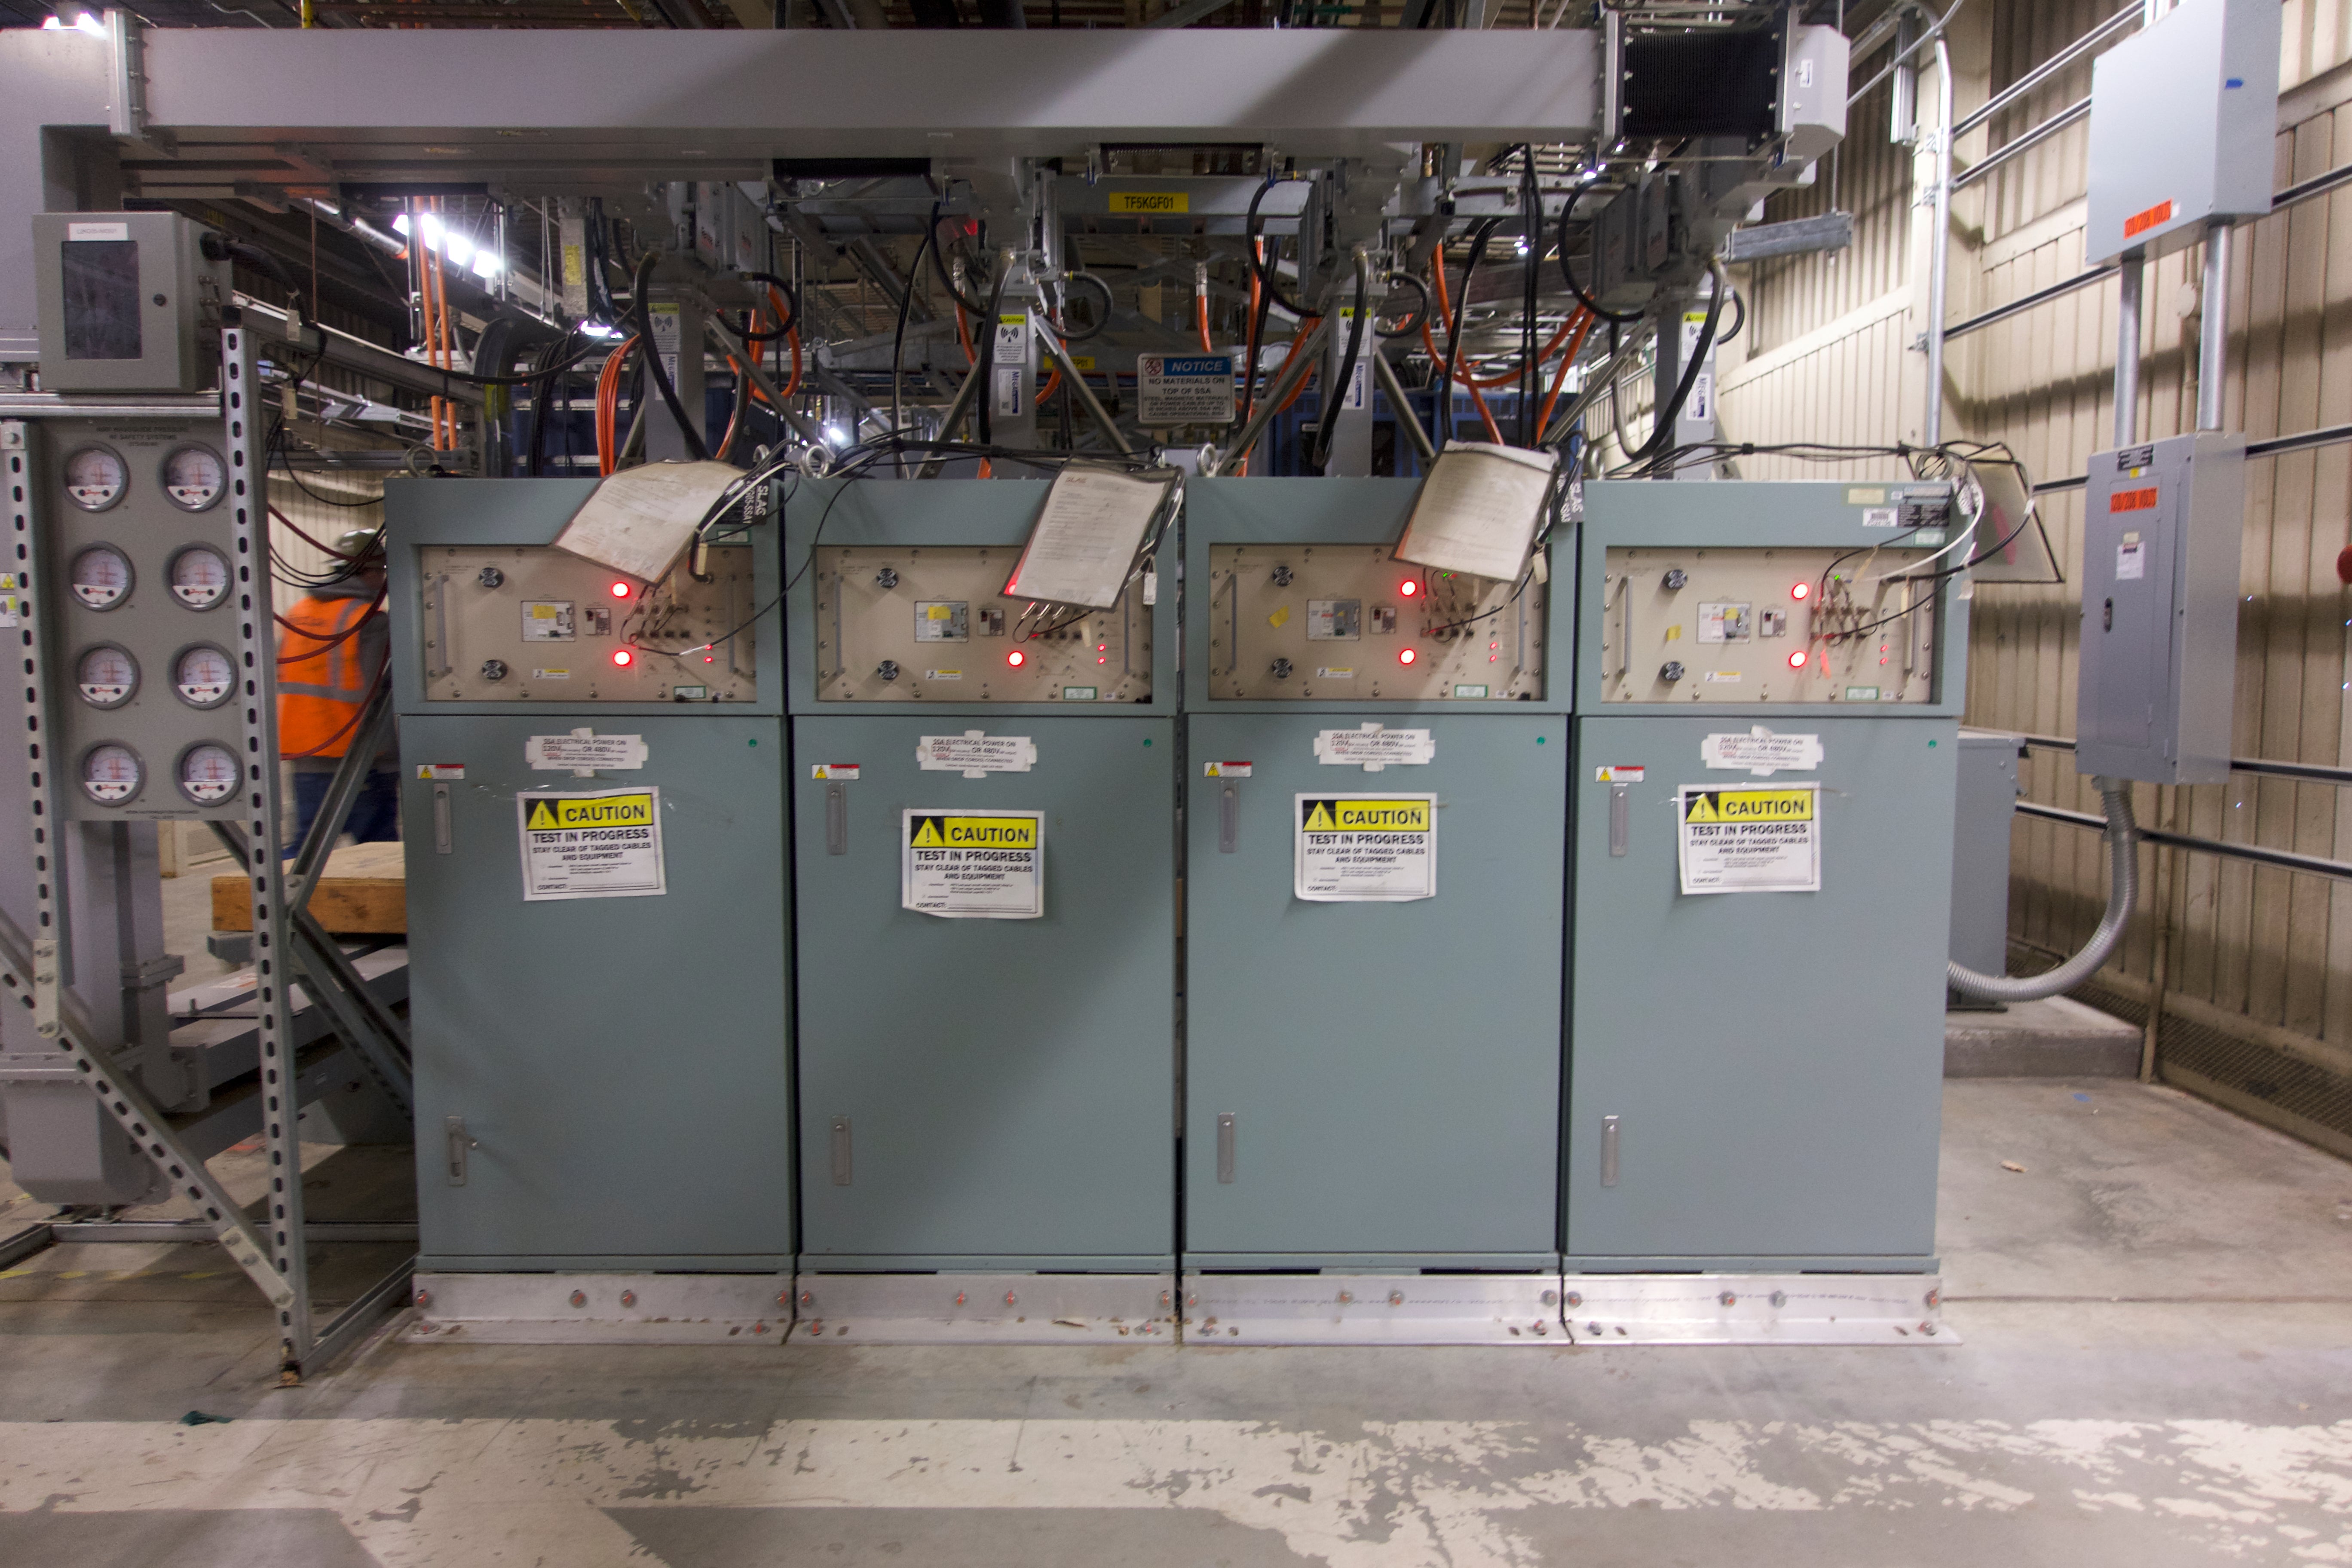 Several of the solid state amplifiers that help accelerate LCLS-II's electrons. (Photo: Isaac Schultz)